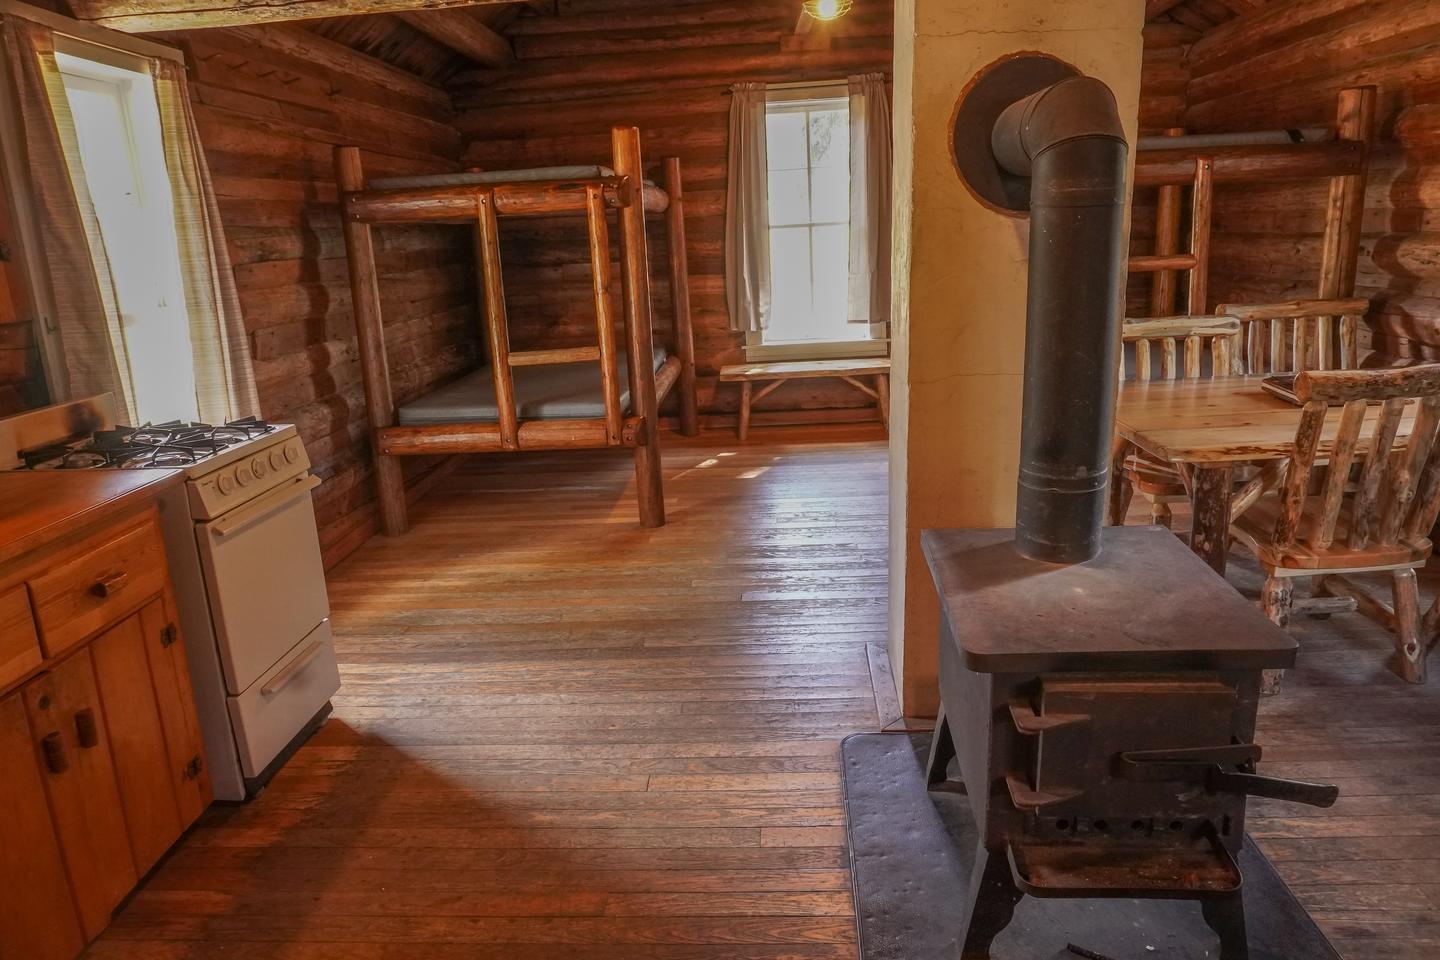 East Fork Cabin Interior (bunks and stove)